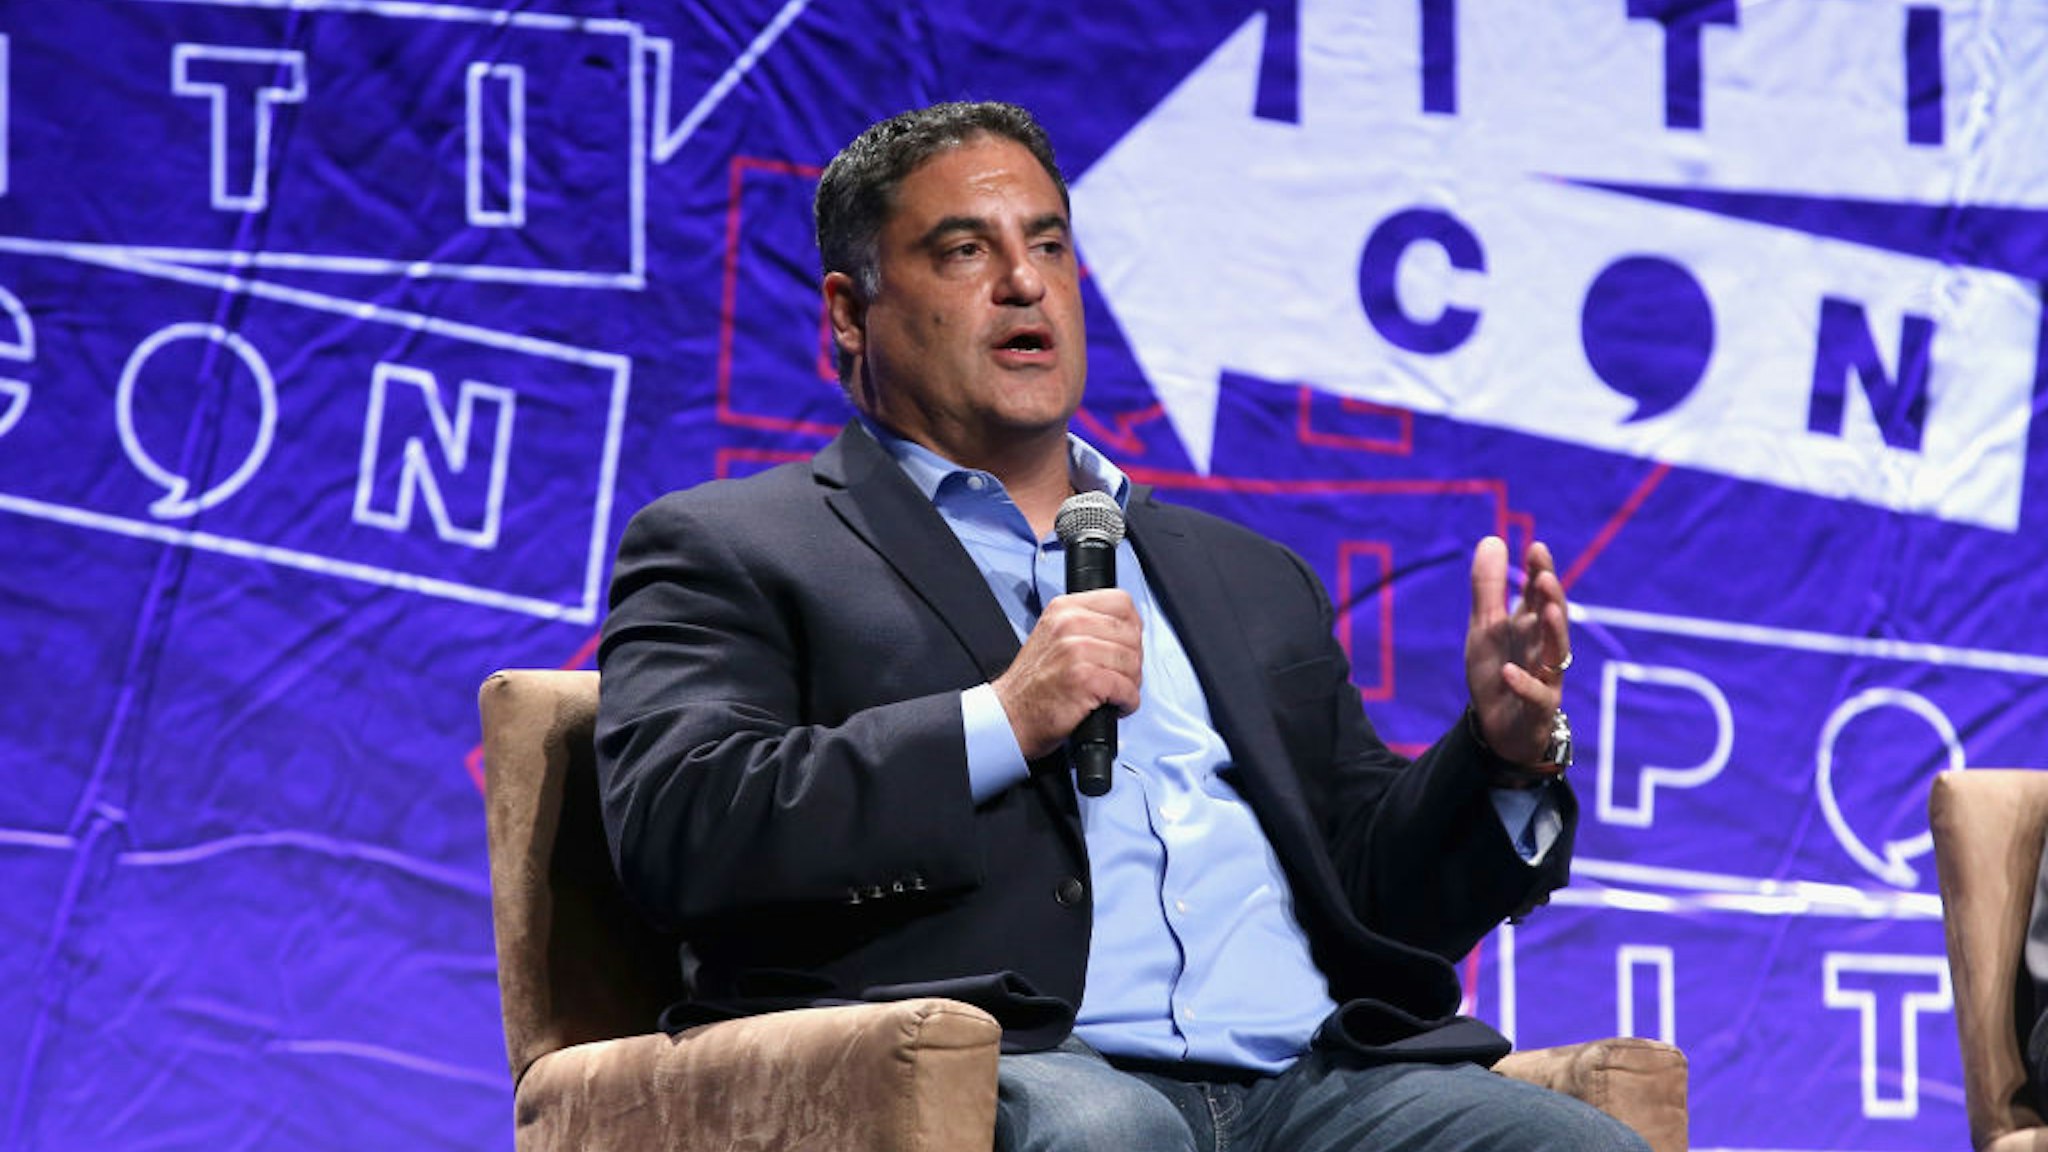 Cenk Uygur speaks onstage during Politicon 2018 at Los Angeles Convention Center on October 21, 2018 in Los Angeles, California.